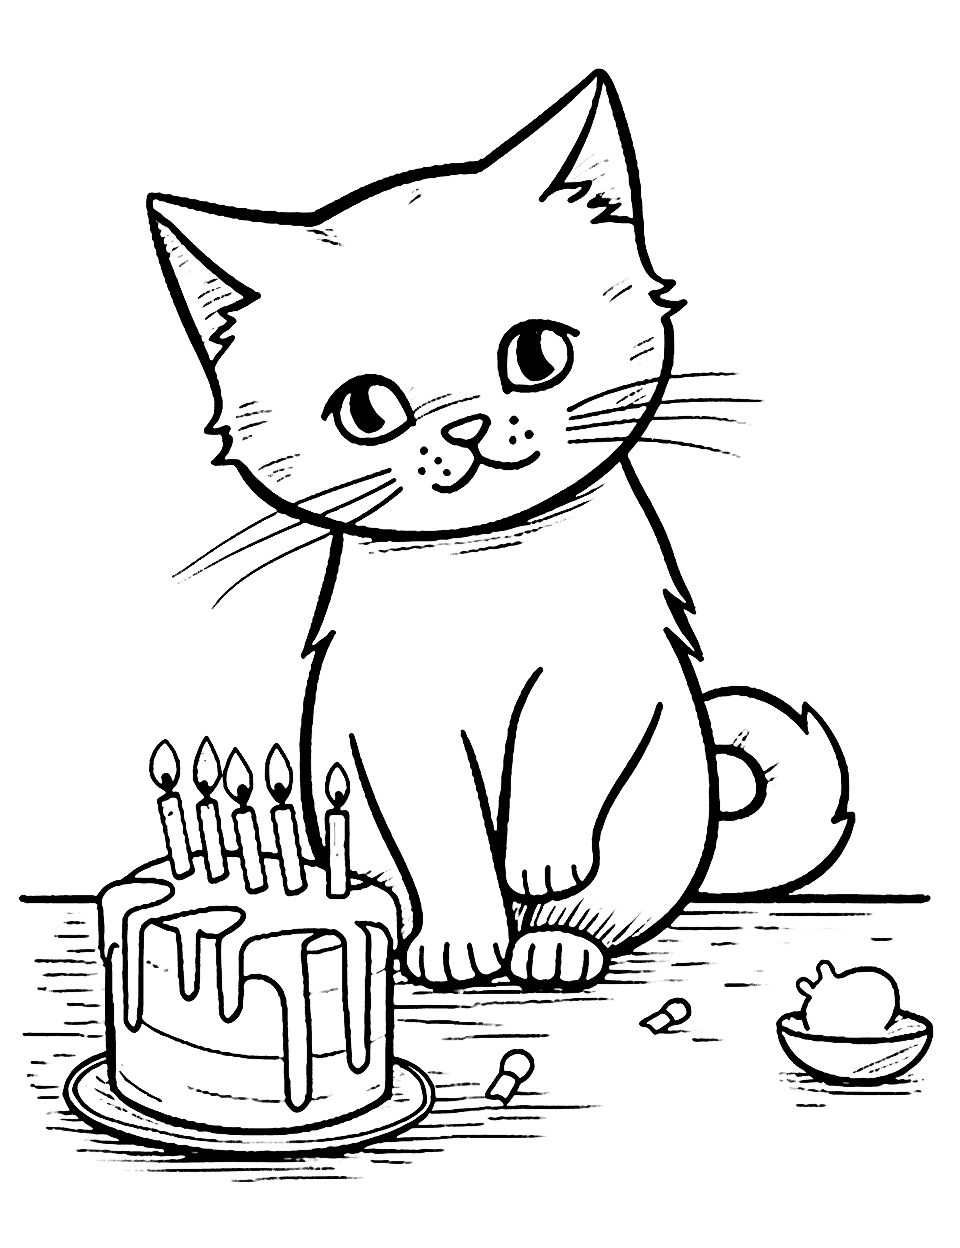 Birthday Cat Blowing Out Candles Coloring Page - A cat blowing out candles on a birthday cake.